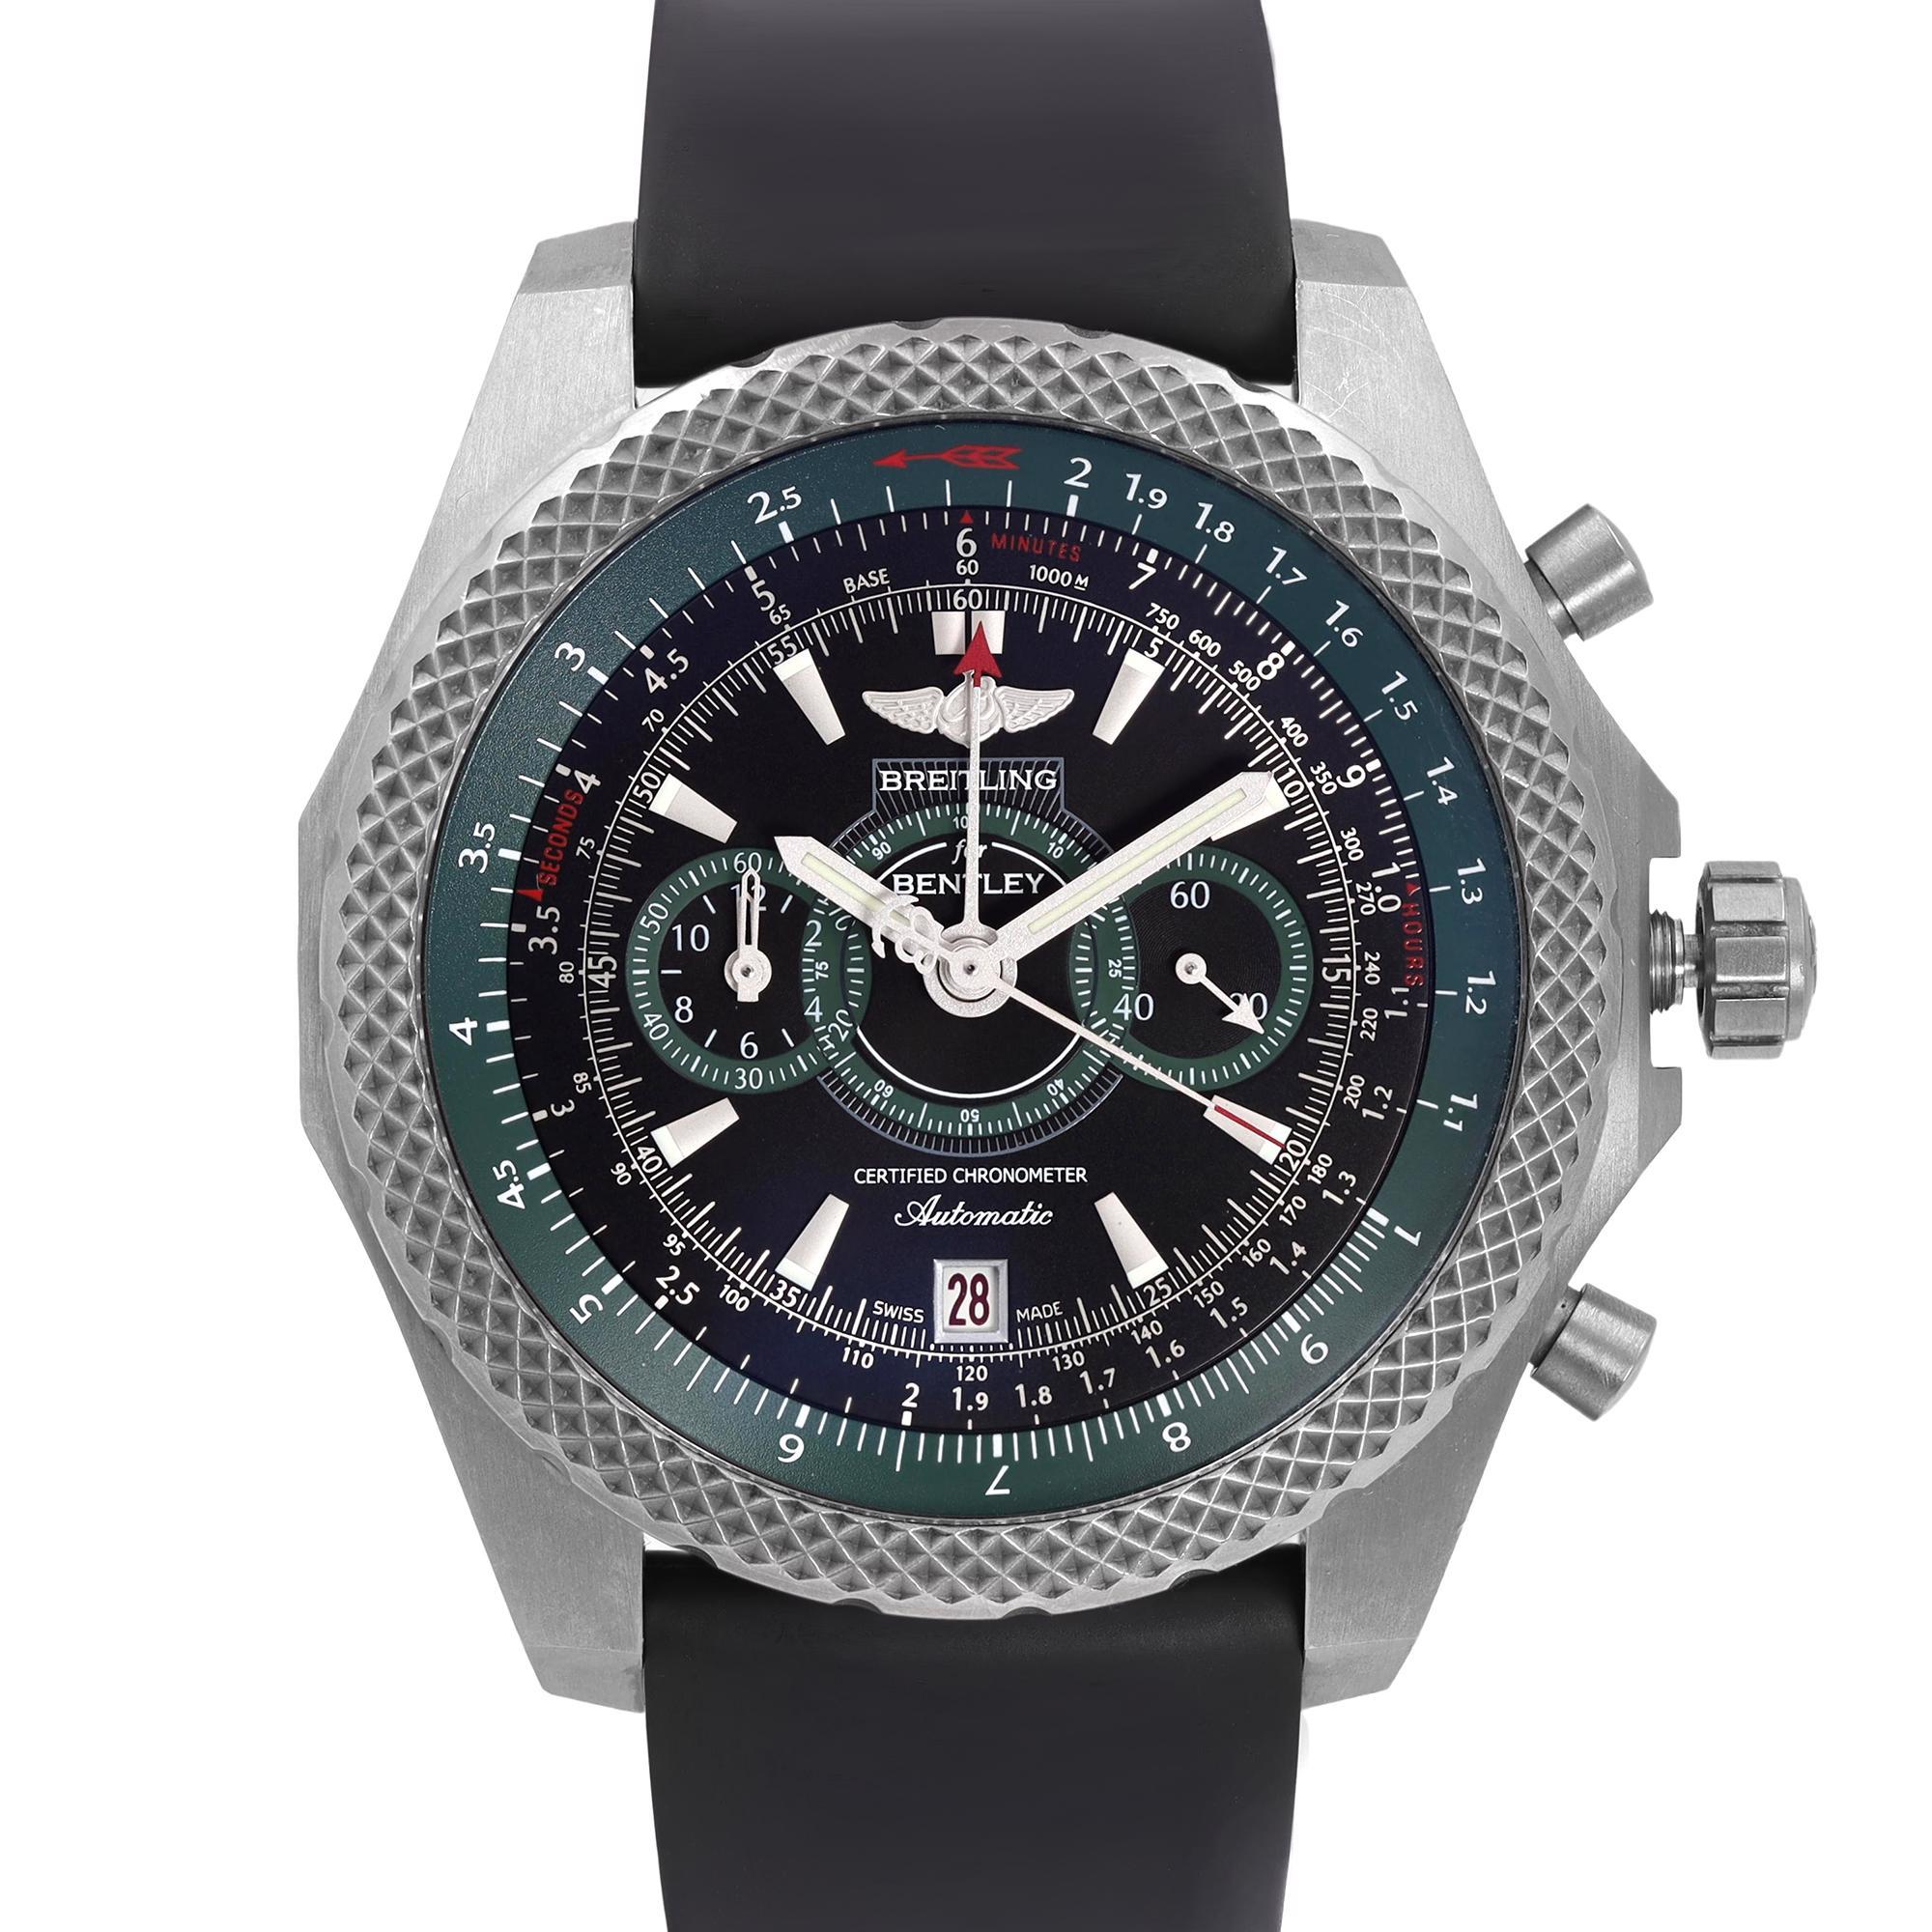 Pre-owned Breitling Bentley Supersports Chronograph Limited Edition Titanium Green Black Dial Automatic Men's Watch E2736536-BB37. This Watch Has Micro Scratches and Nicks Along the Side of the Case. Powered by an Automatic Movement this Beautiful